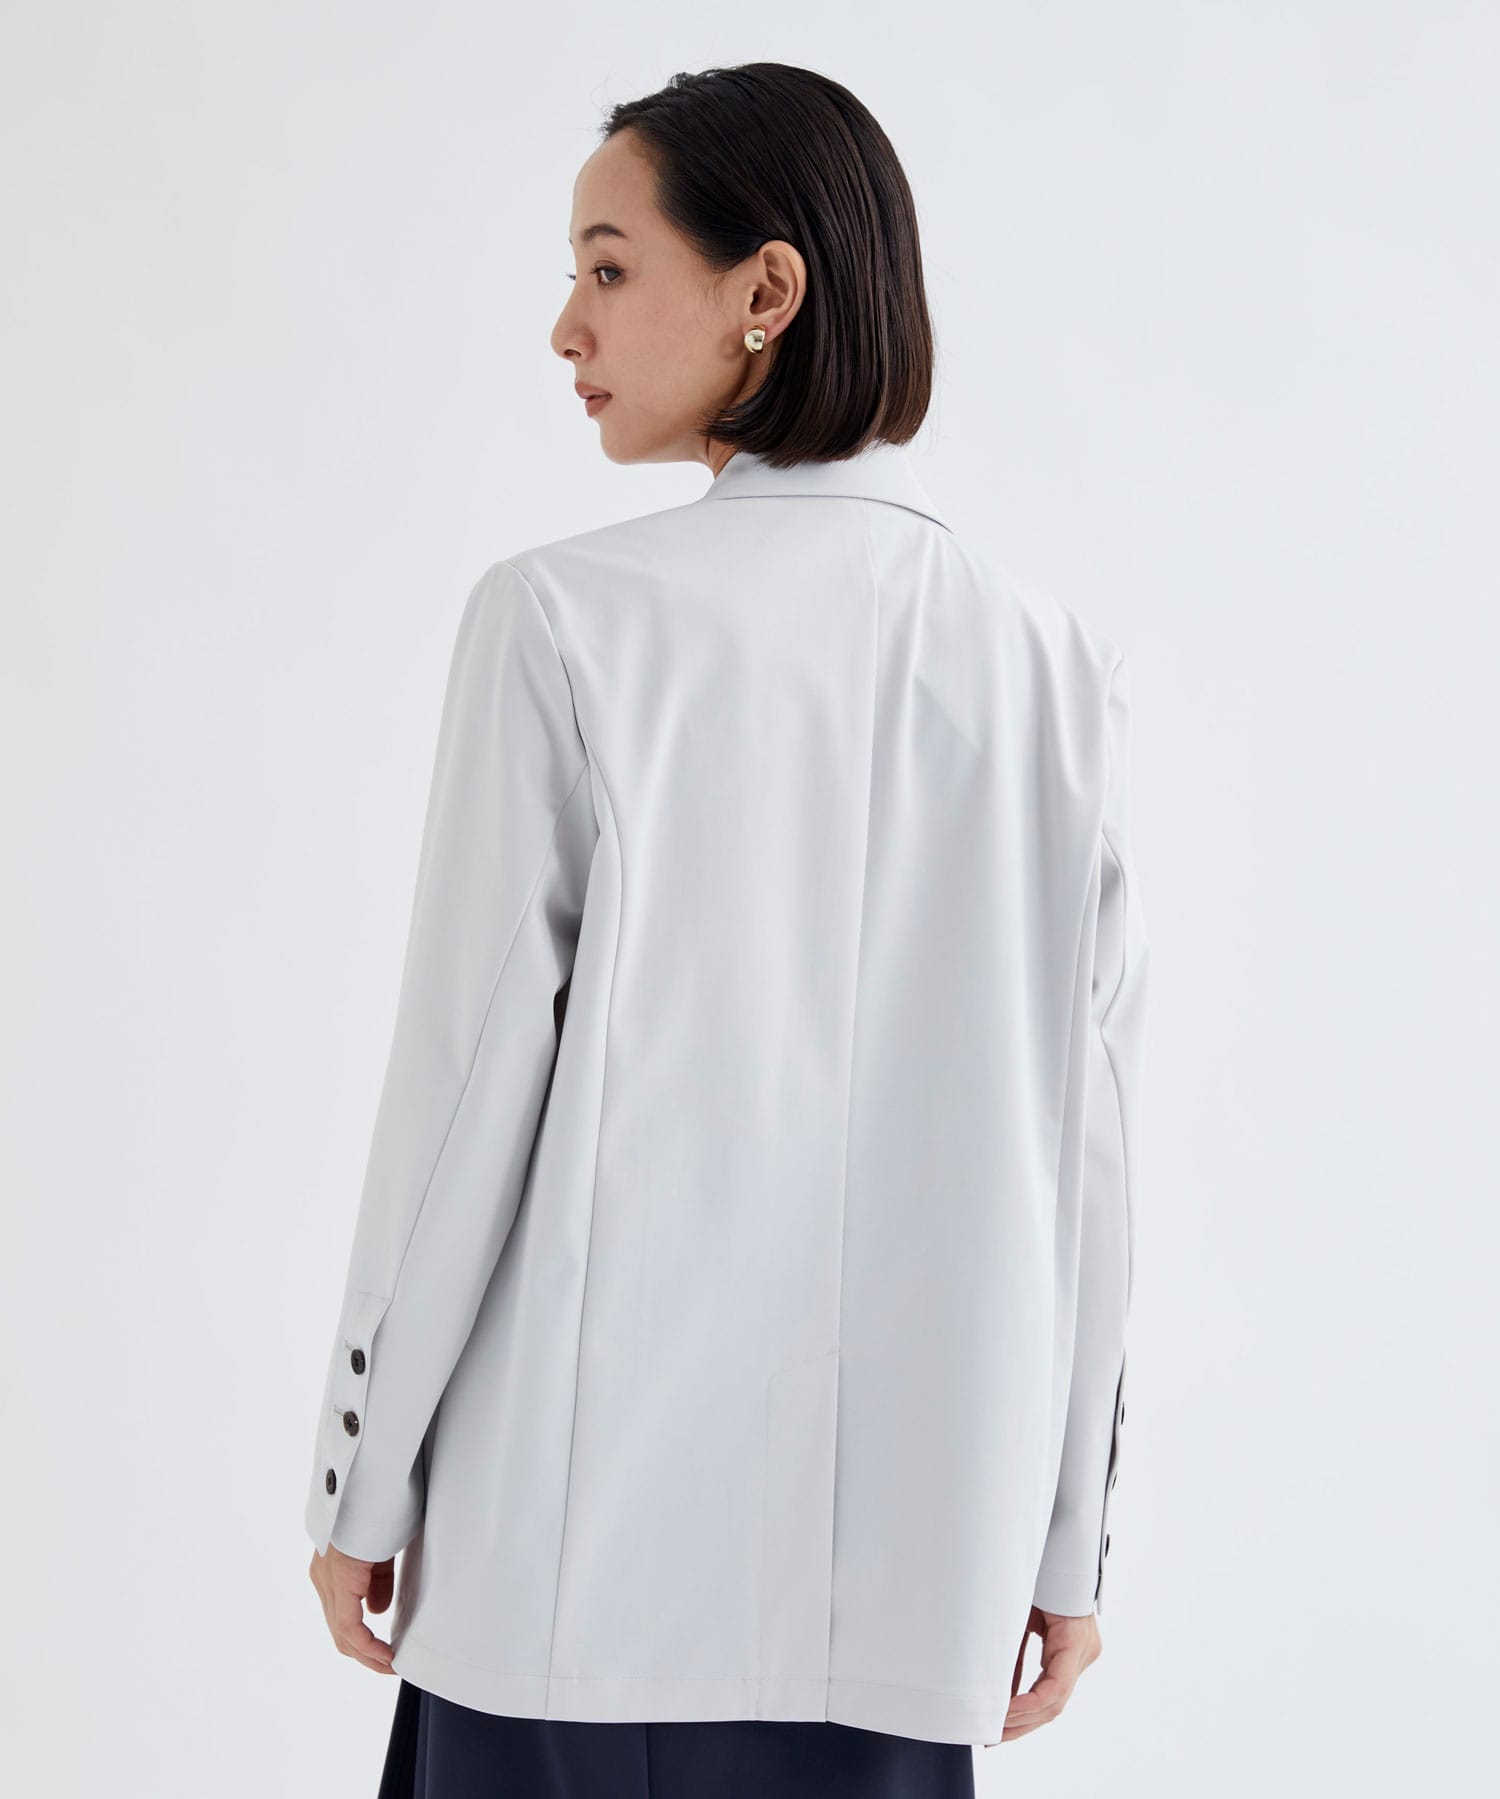 WASHABLE HIGH FANCTION JERSEY JACKET THE PERMANENT EYE